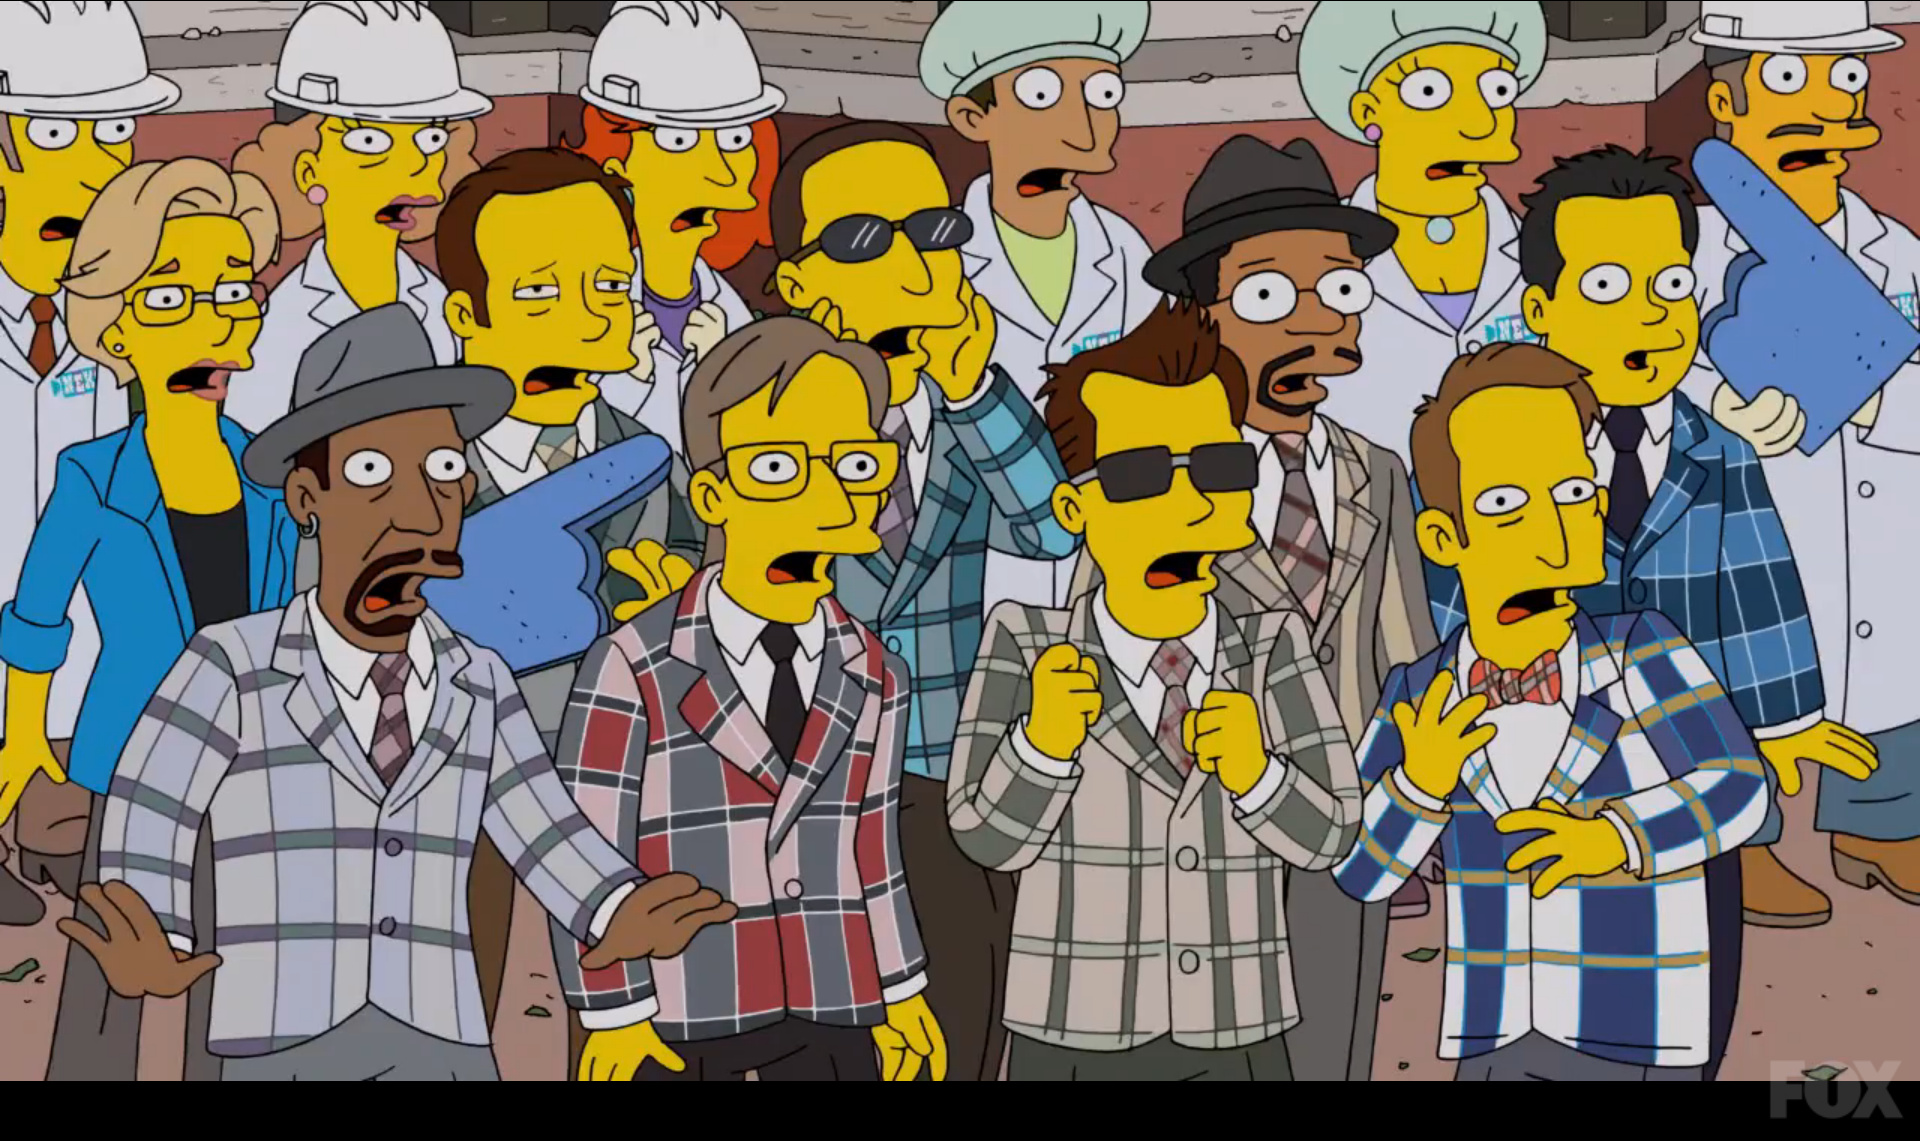 Boston Ska Band The Mighty Mighty Bosstones Make a Camera Appearance on The Simpsons